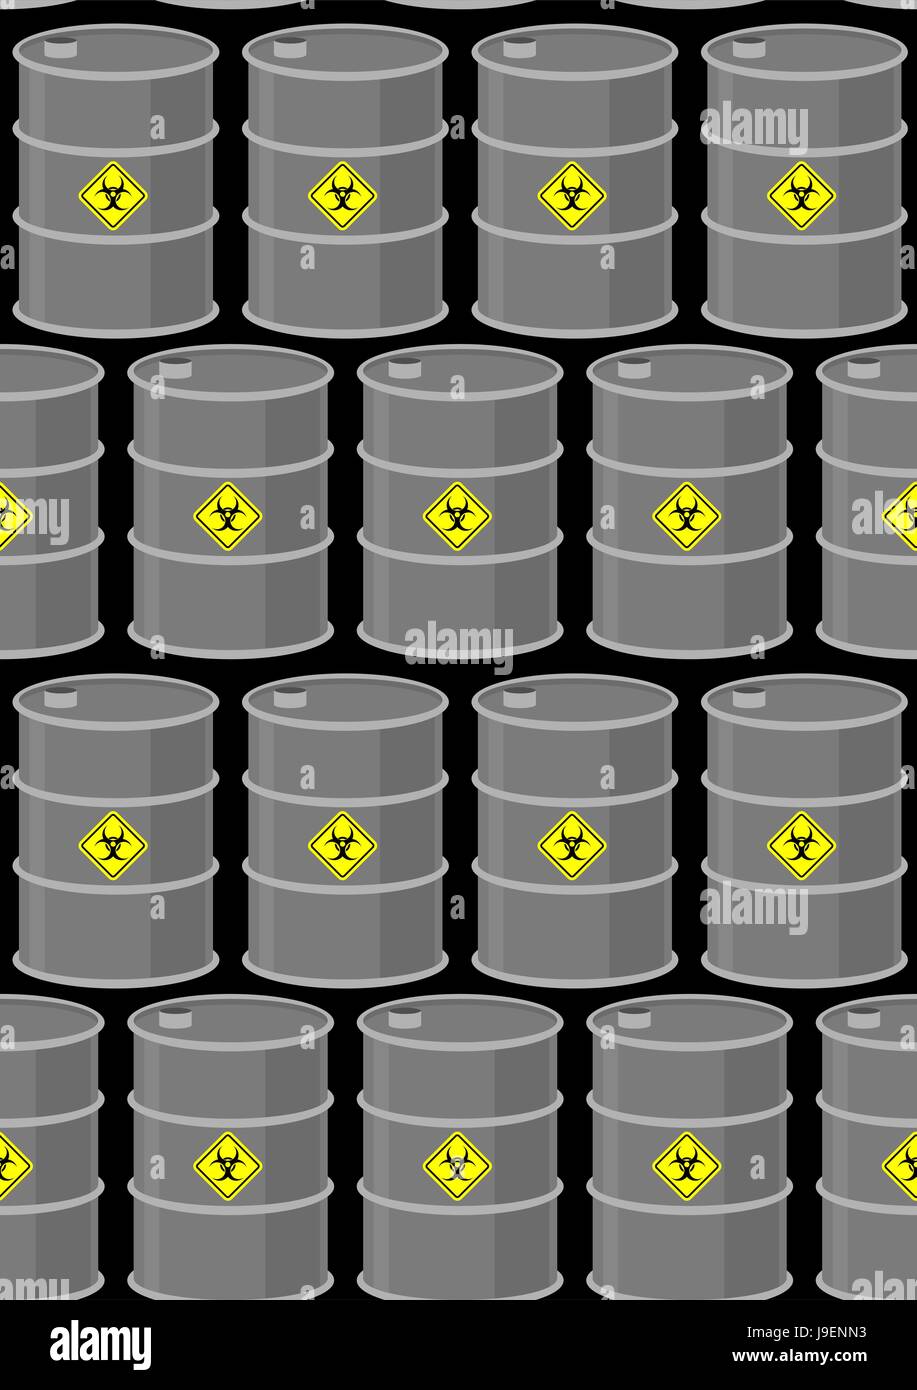 Barrel with biohazard seamless pattern. Gray metal drums on a black background. Vector background toxic waste dump. Stock Vector